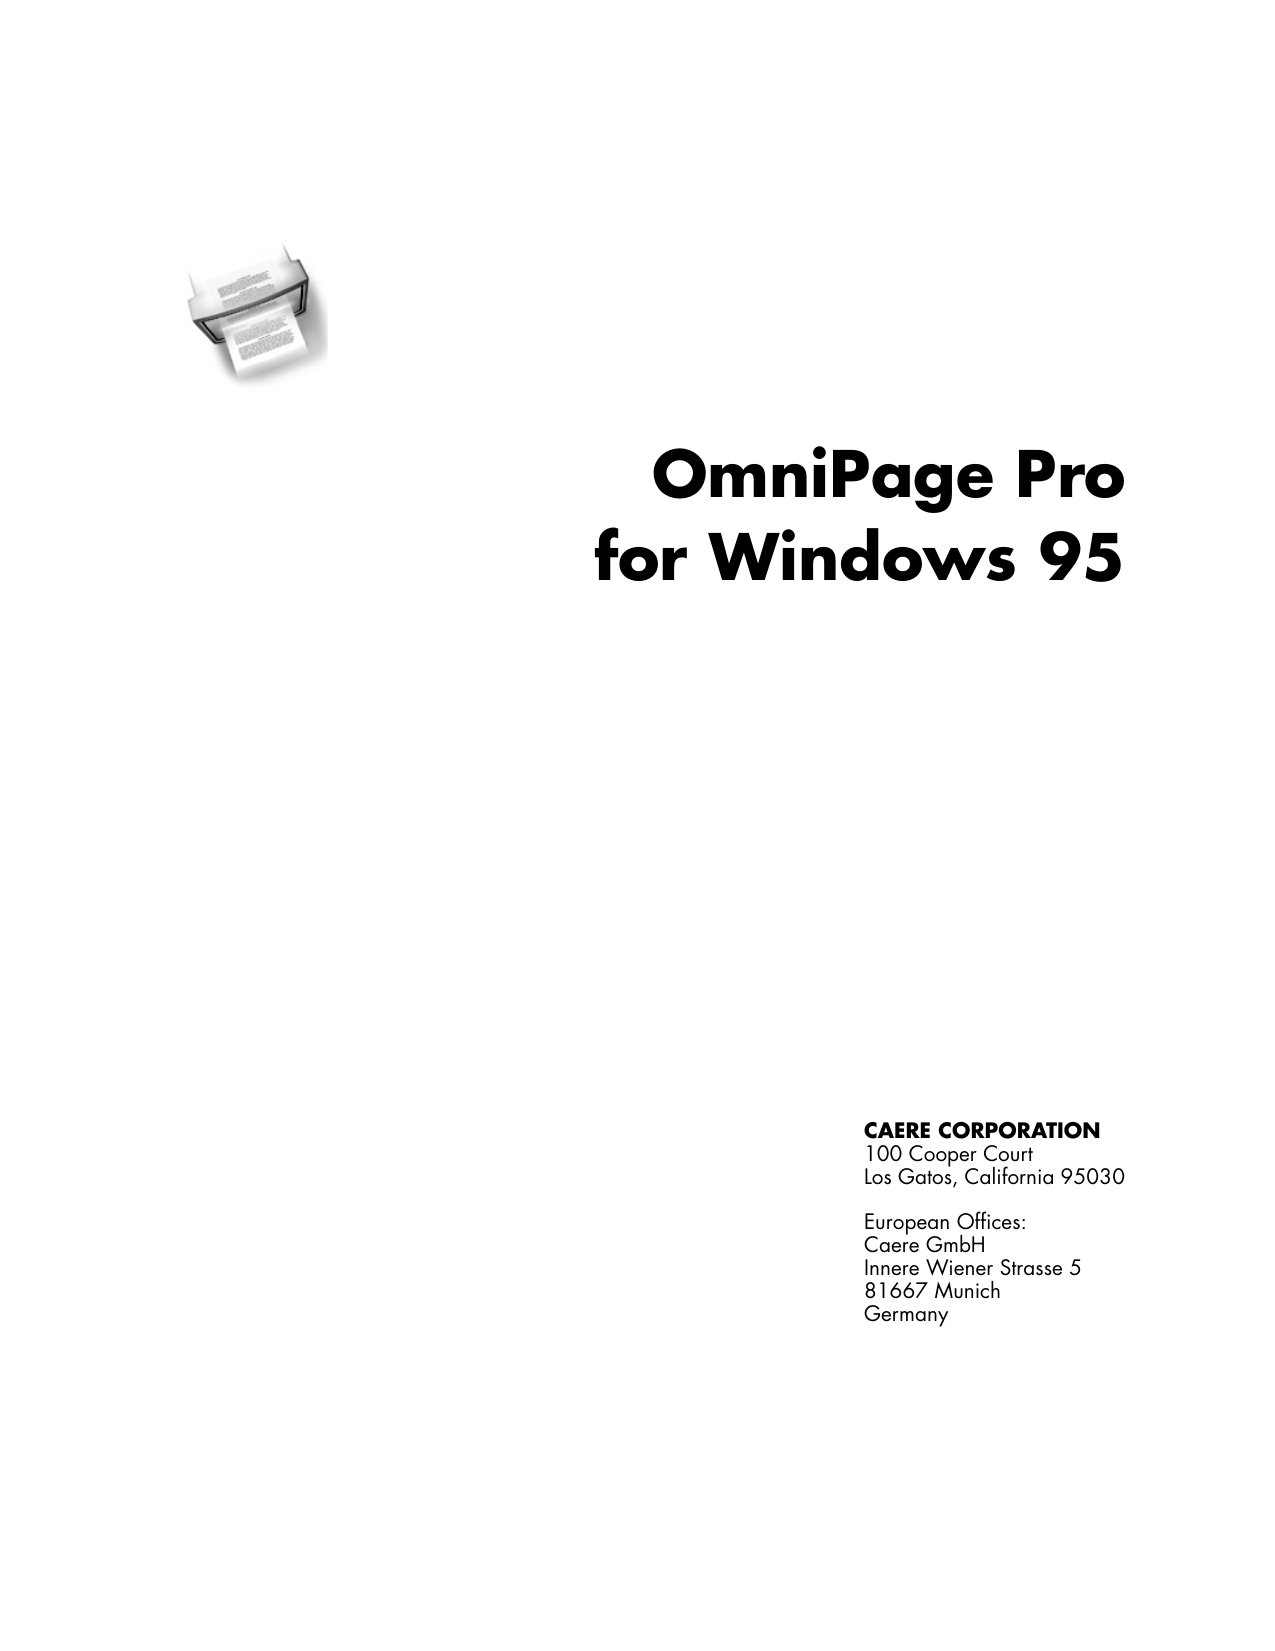 omnipage pro 8 free download